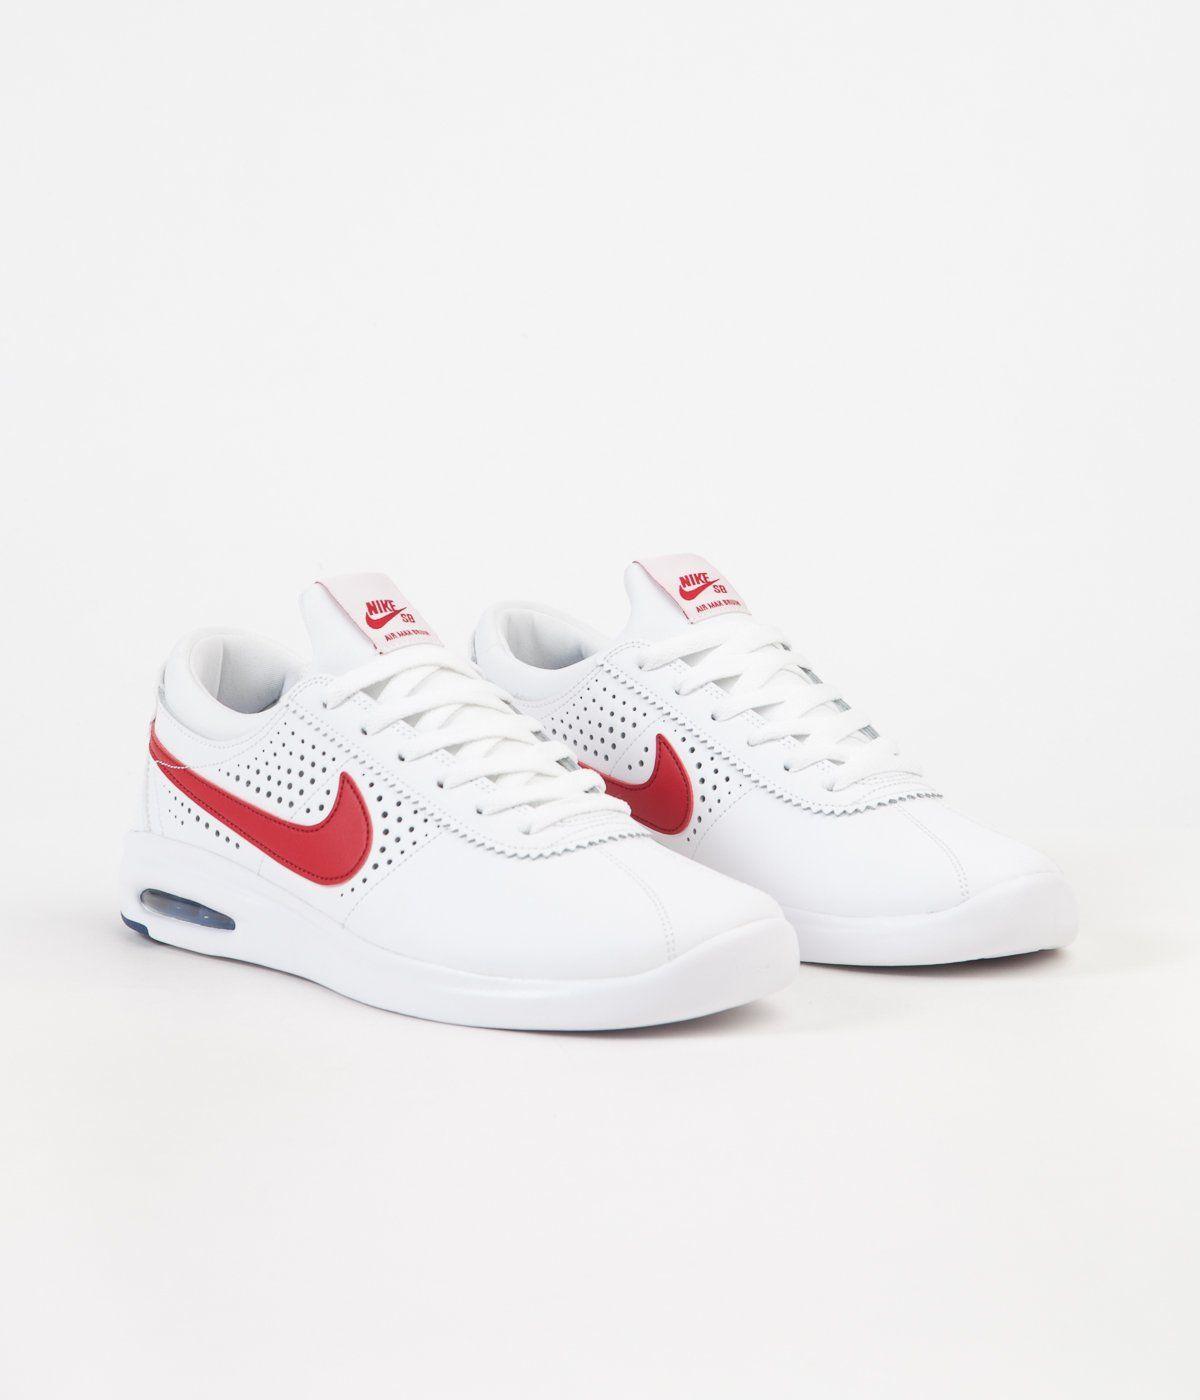 white nike shoes red swoosh